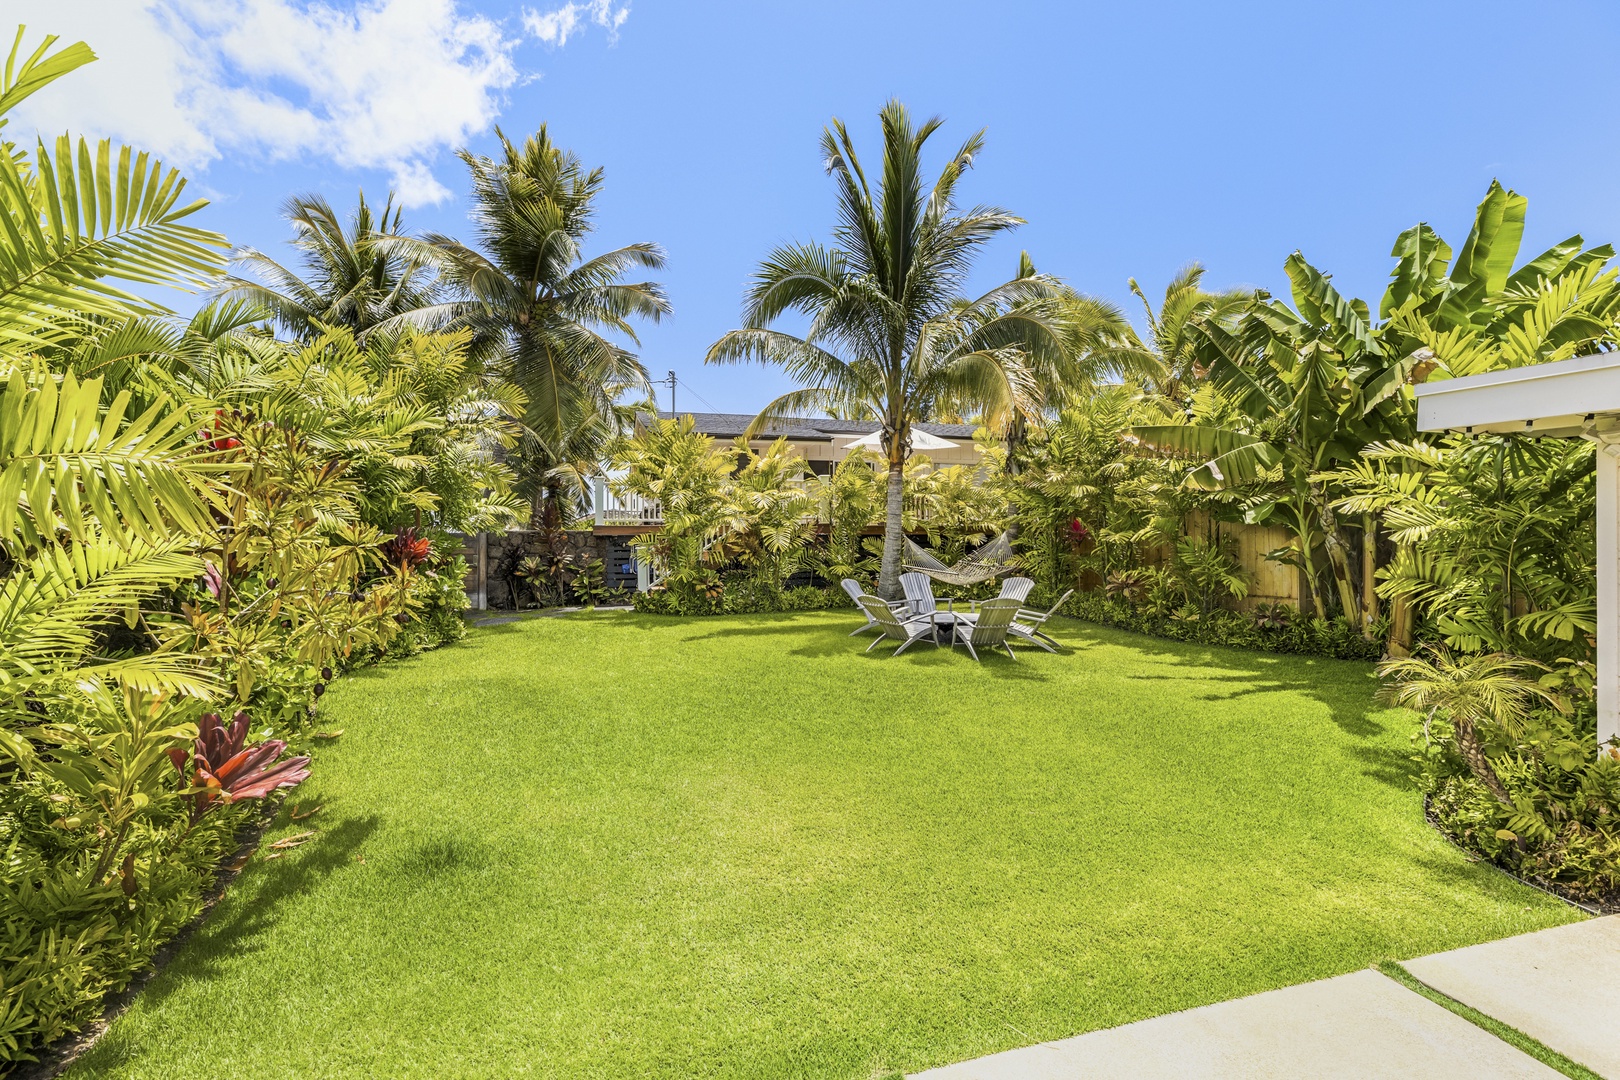 Kailua Vacation Rentals, Seahorse Estate - Fully Fenced Yard and Gated Driveway